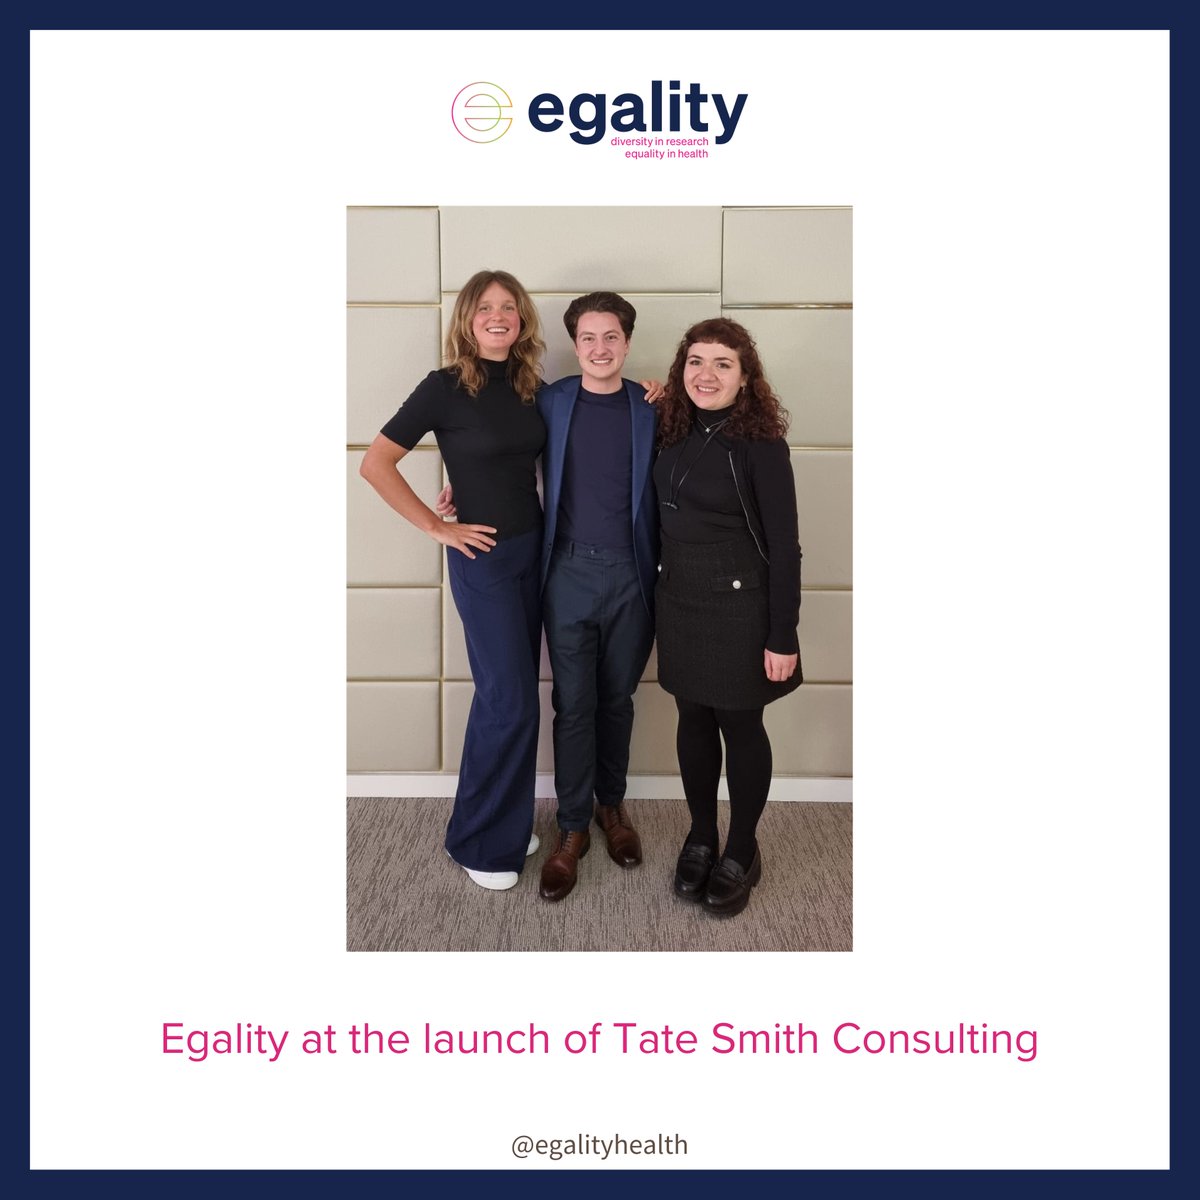 Cheers to Tate Smith's consultancy launch! From breaking barriers in corporate spaces to championing trans inclusion & creating an inclusive, representative environment, his journey is an inspiration. Here's to celebrating his accomplishments & best wishes for this new venture!🎉